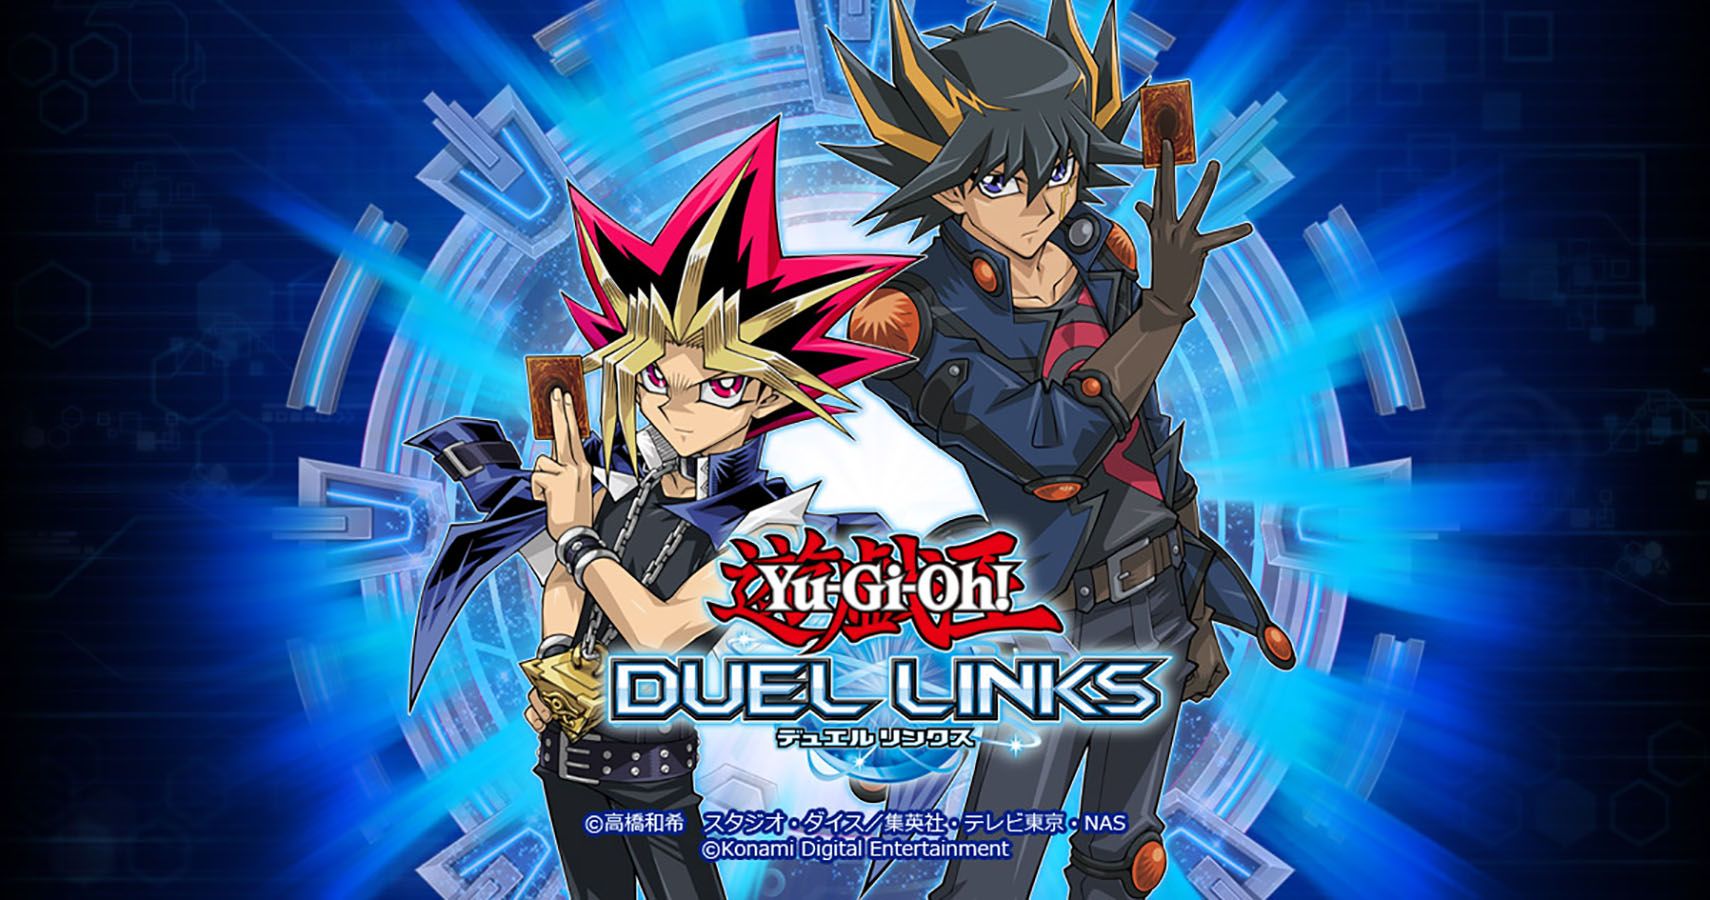 Advertising for Yu-Gi-Oh! Duel Links